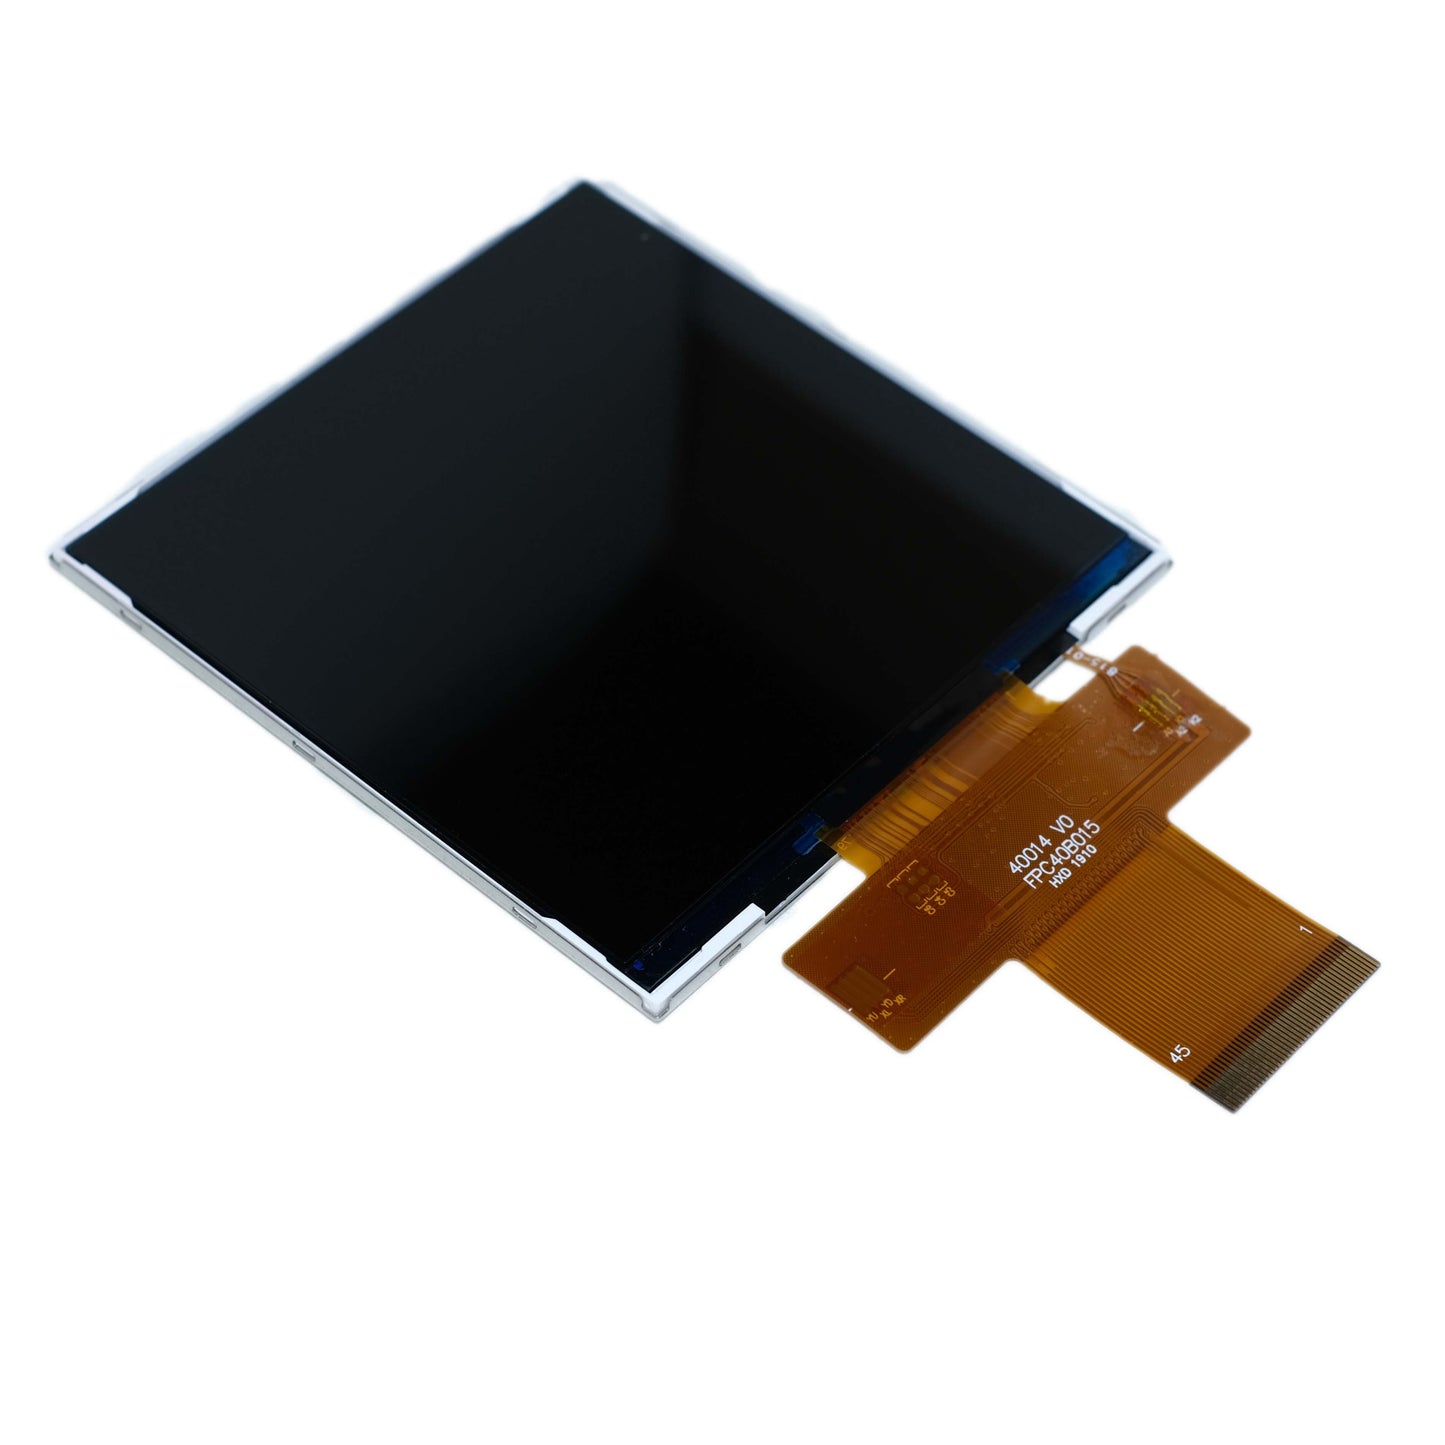 top view of 4.0-inch IPS high brightness display panel with 480x480 resolution